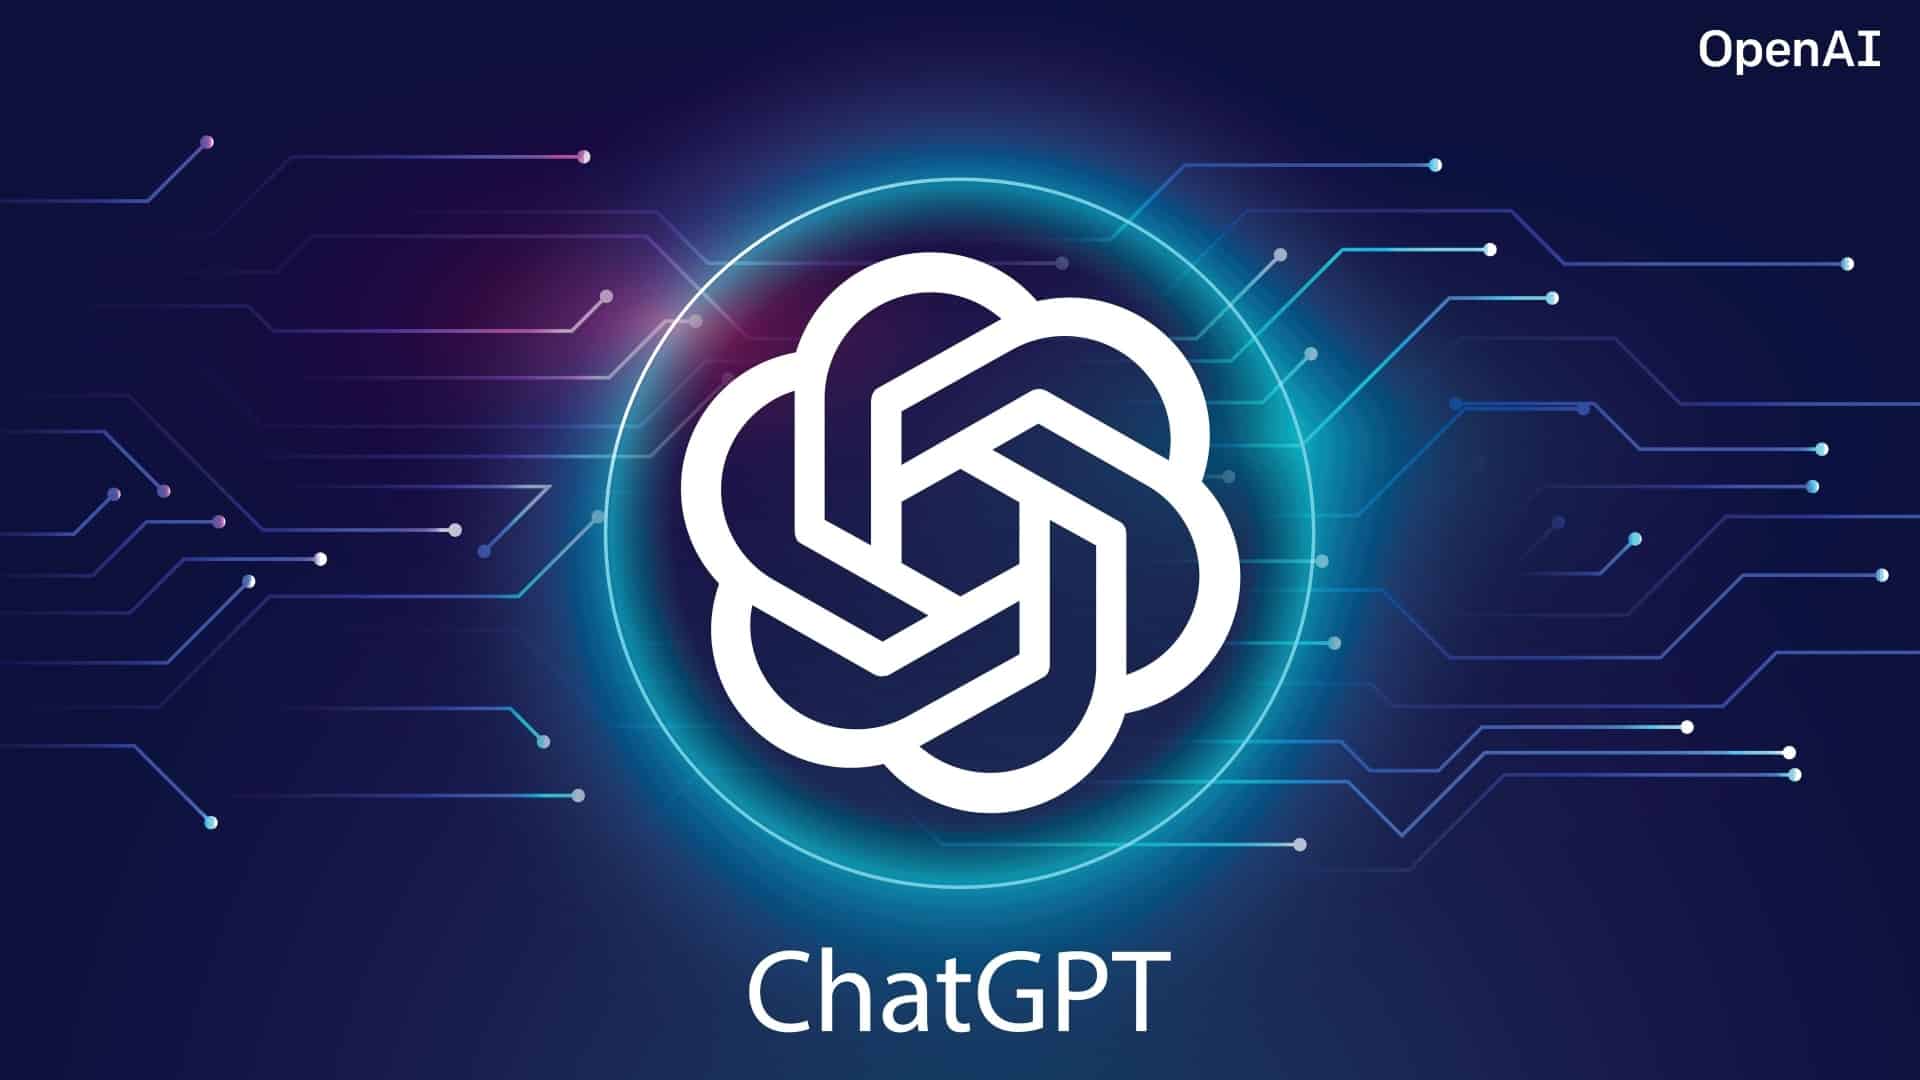 ChatGPT no longer requires an account to use, but there are some limitations